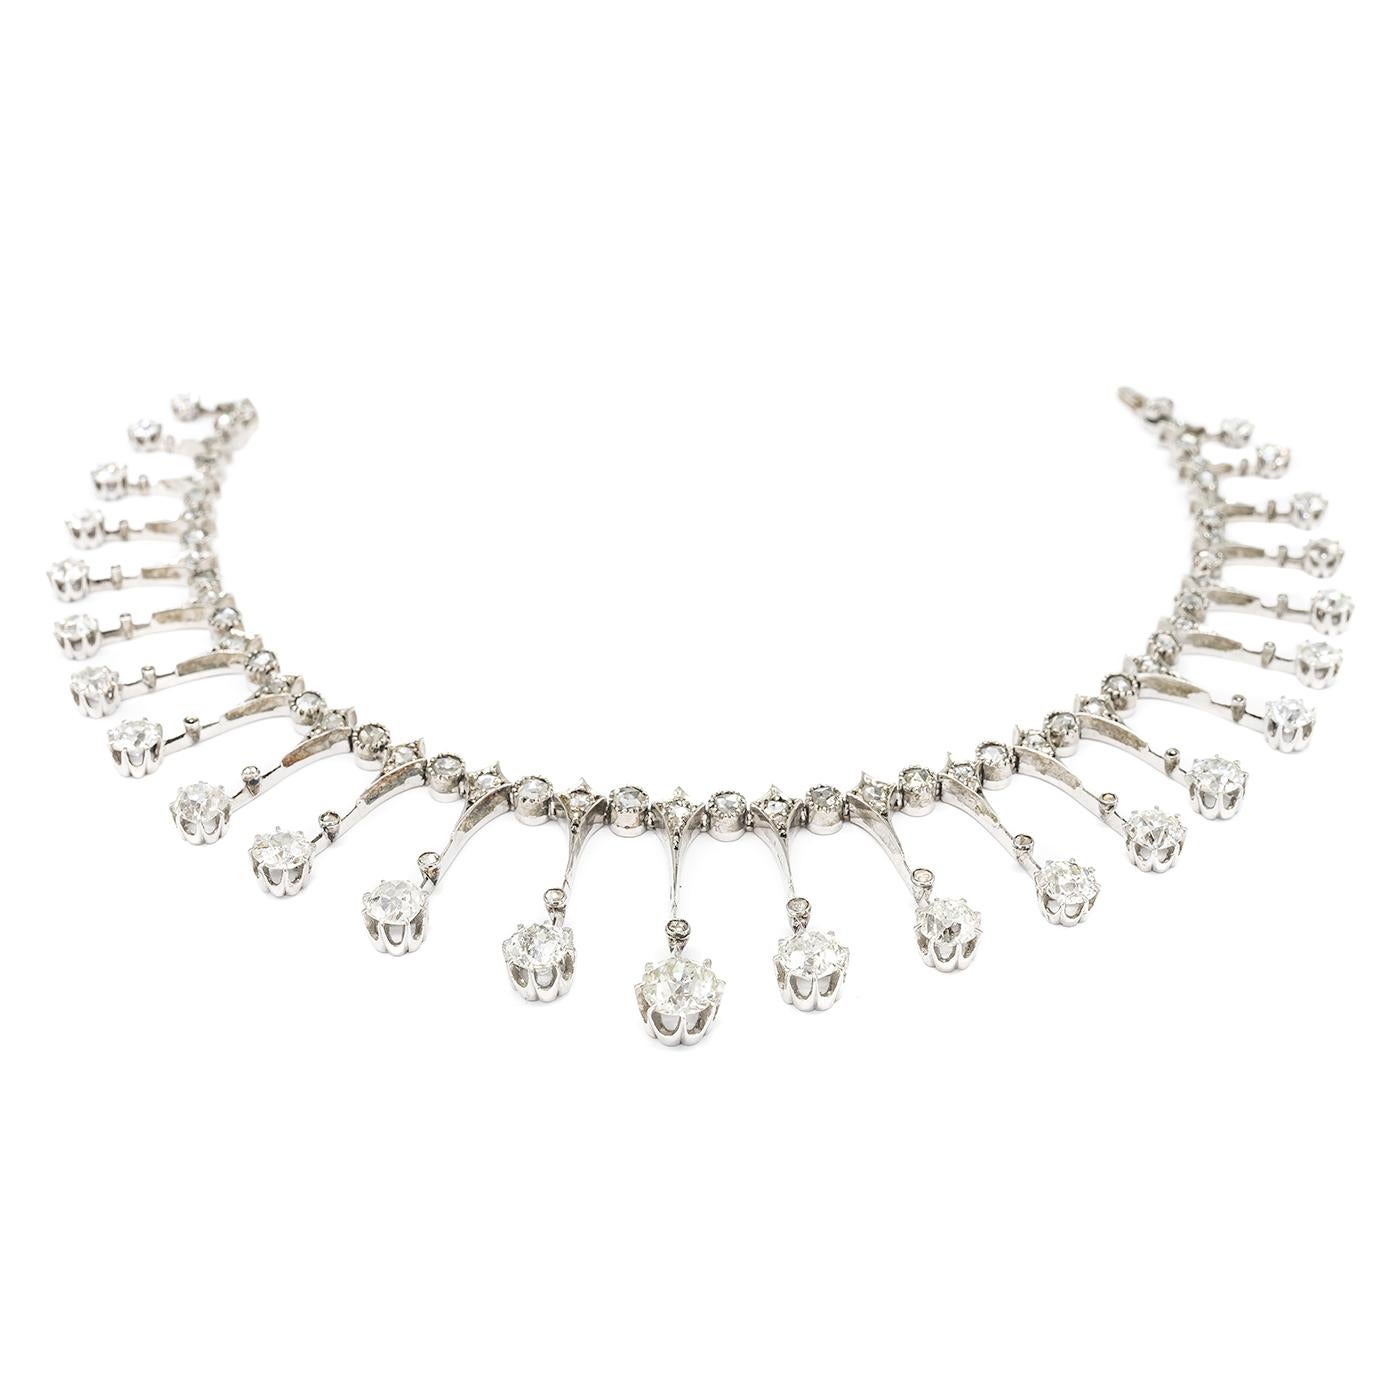 Old Mine Cut Antique Diamond Fringe Tiara Necklace, Silver Upon Gold, circa 1910 For Sale